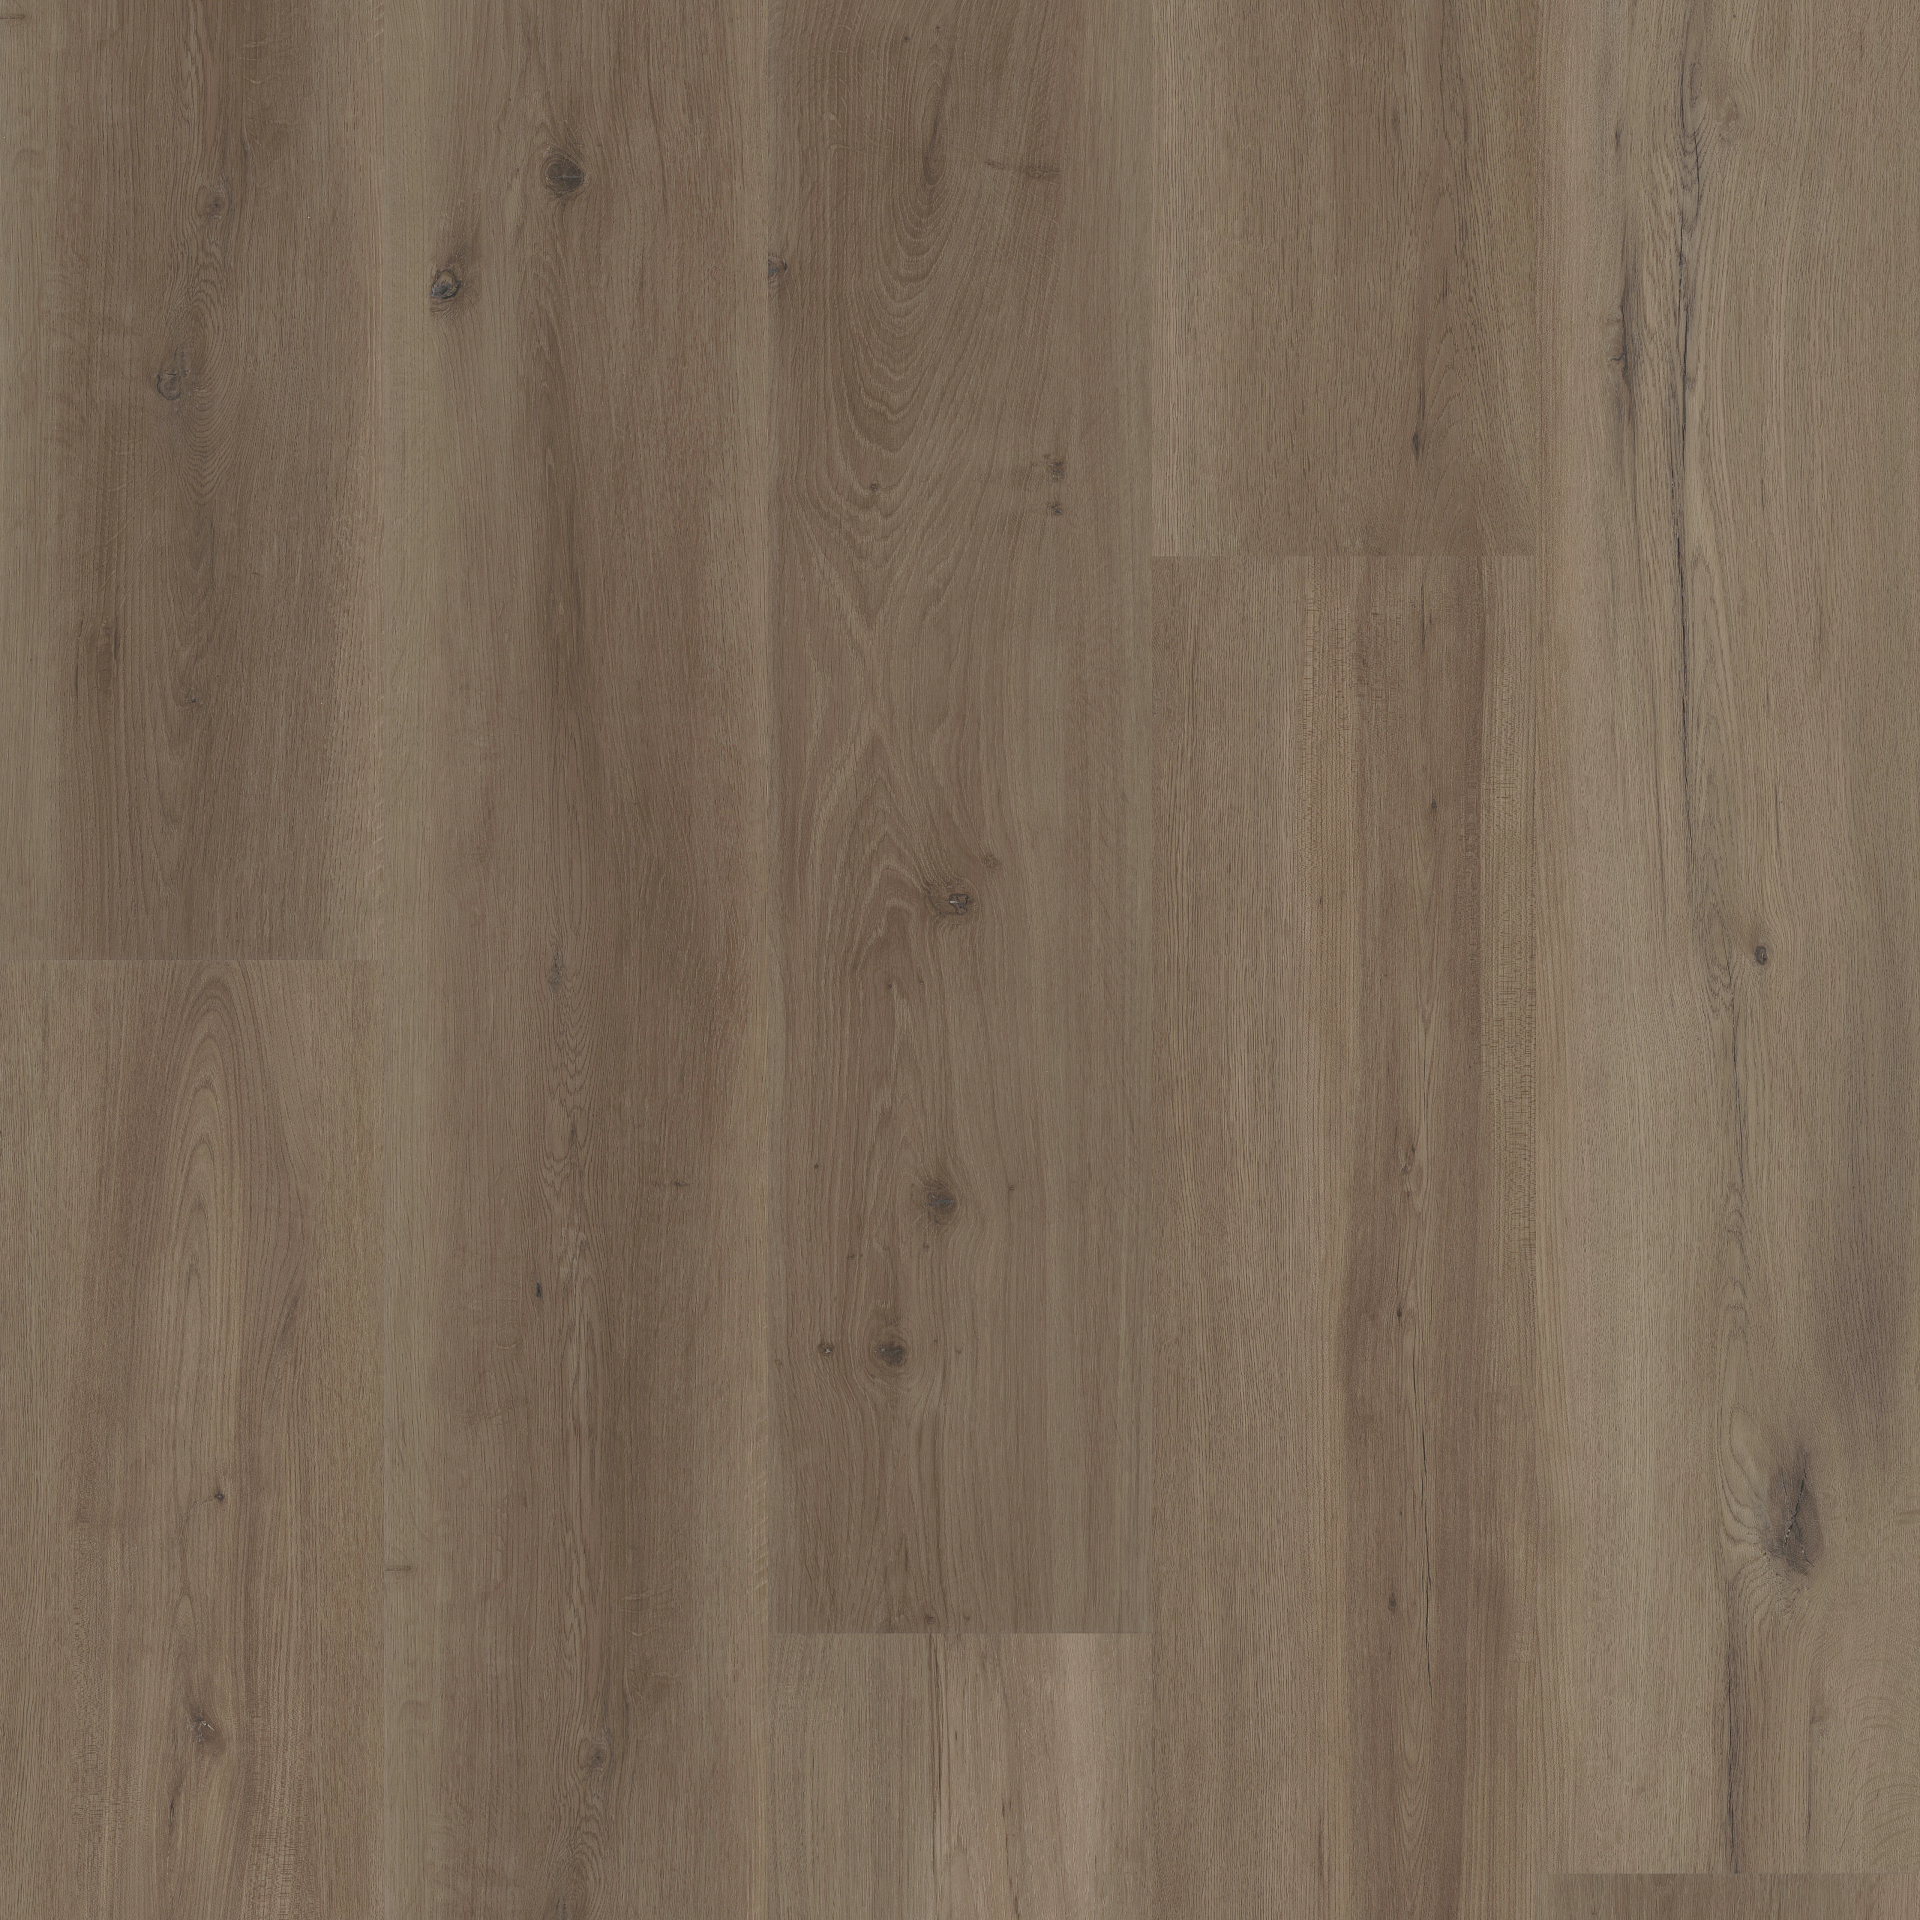 Floating LVT – Essential Floor Products